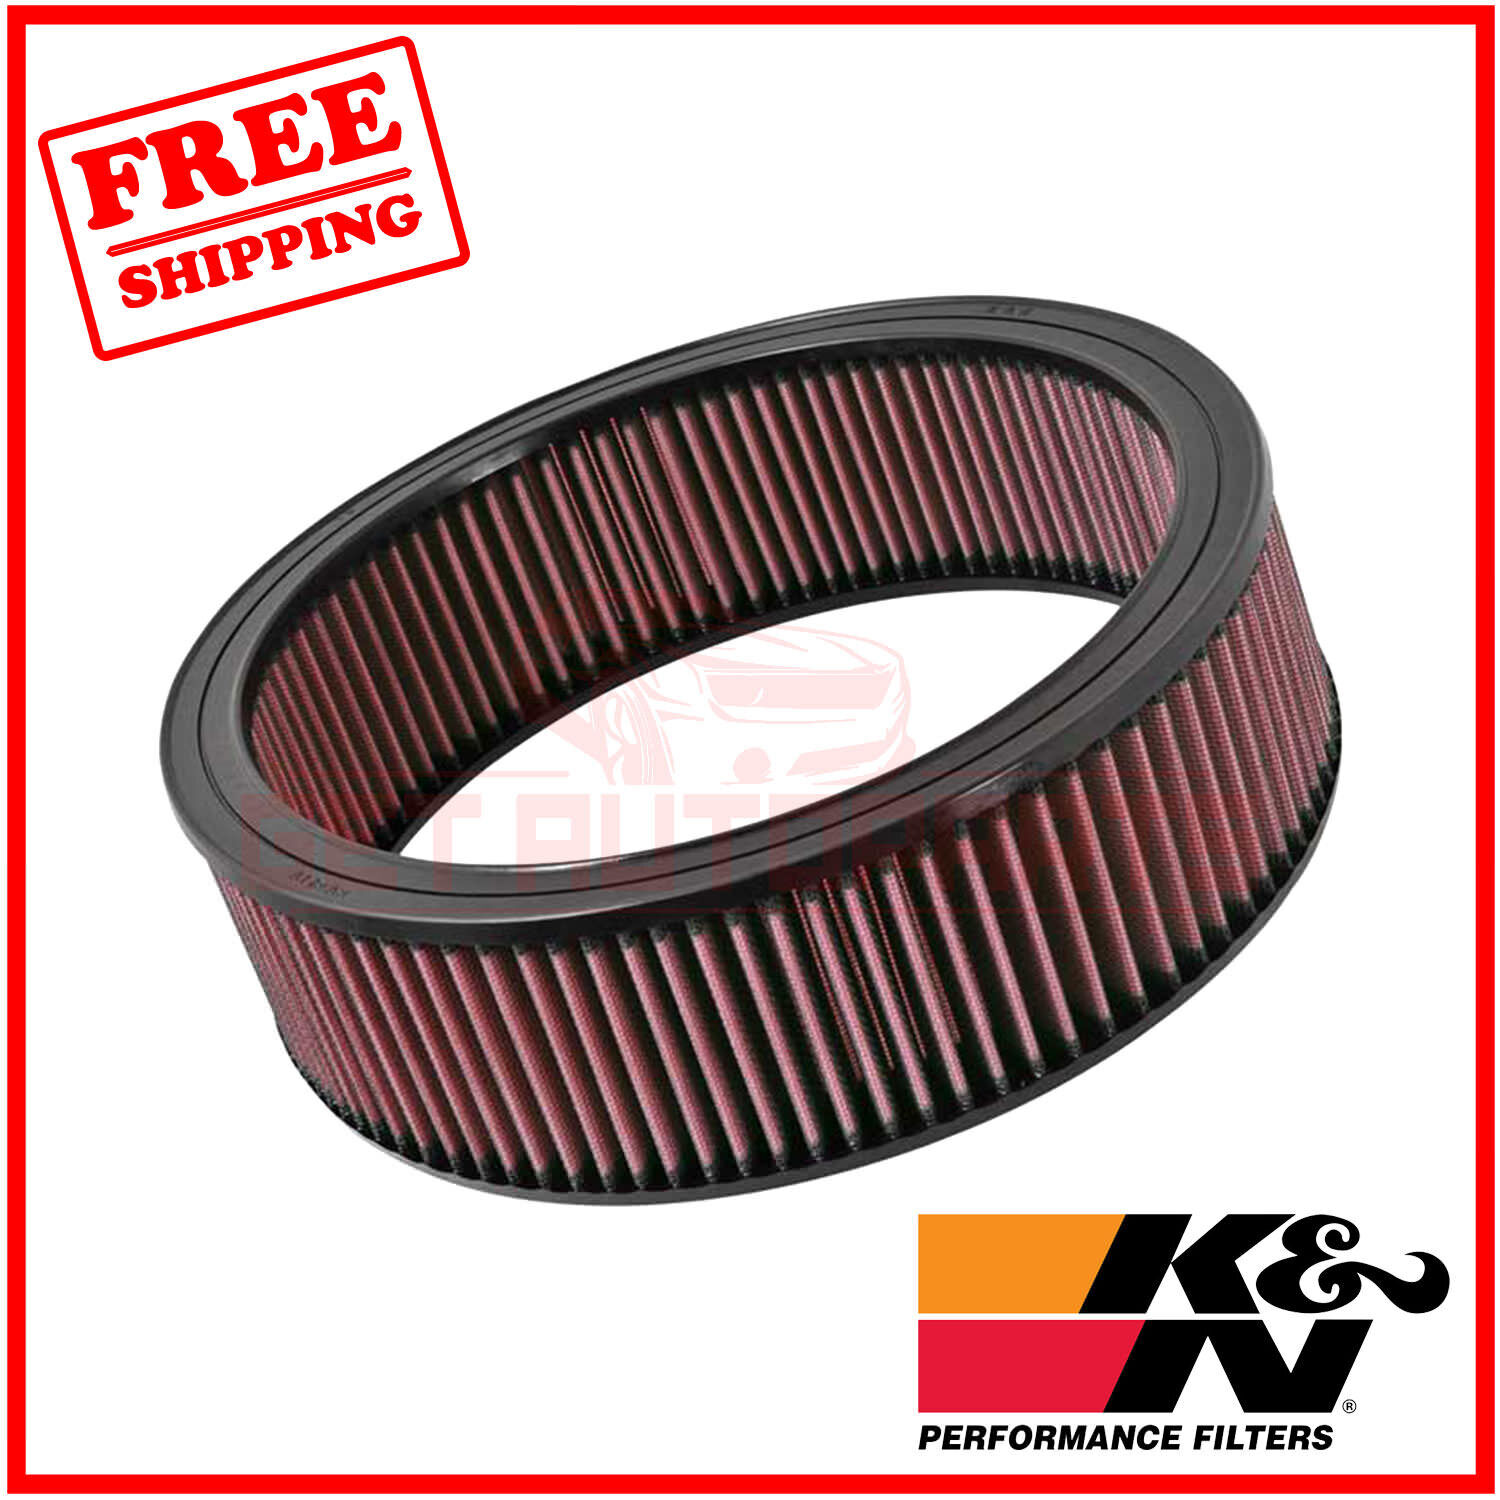 K&N Replacement Air Filter for GMC Caballero 1978-1987